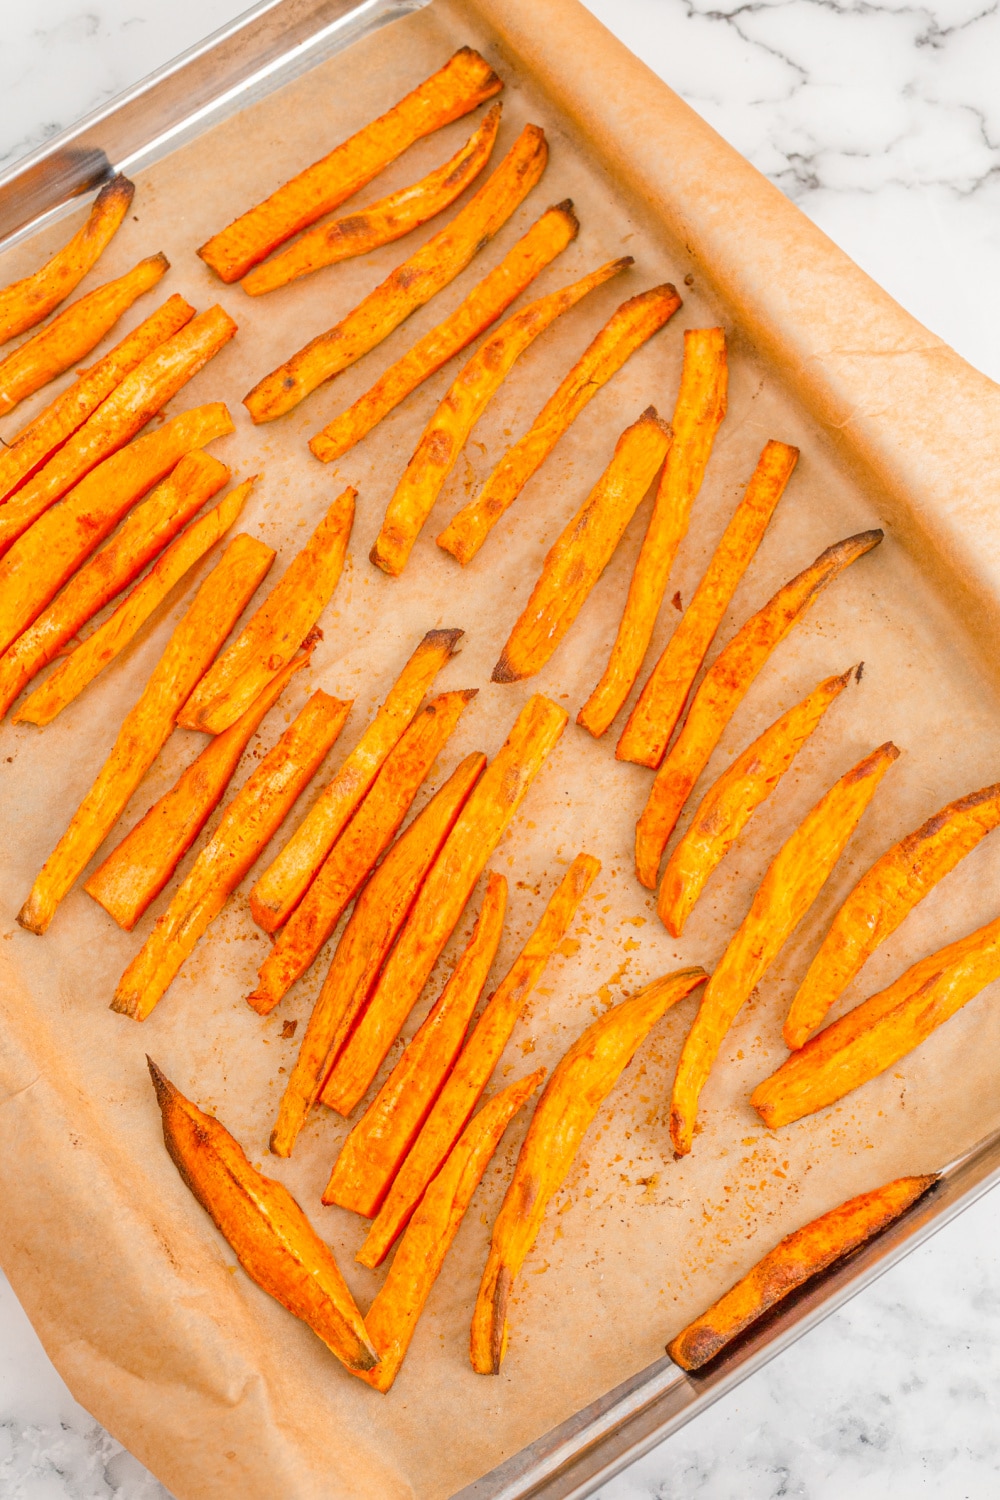 Sweet Potato Fries from the oven on a baking sheet lined with parchment paper.